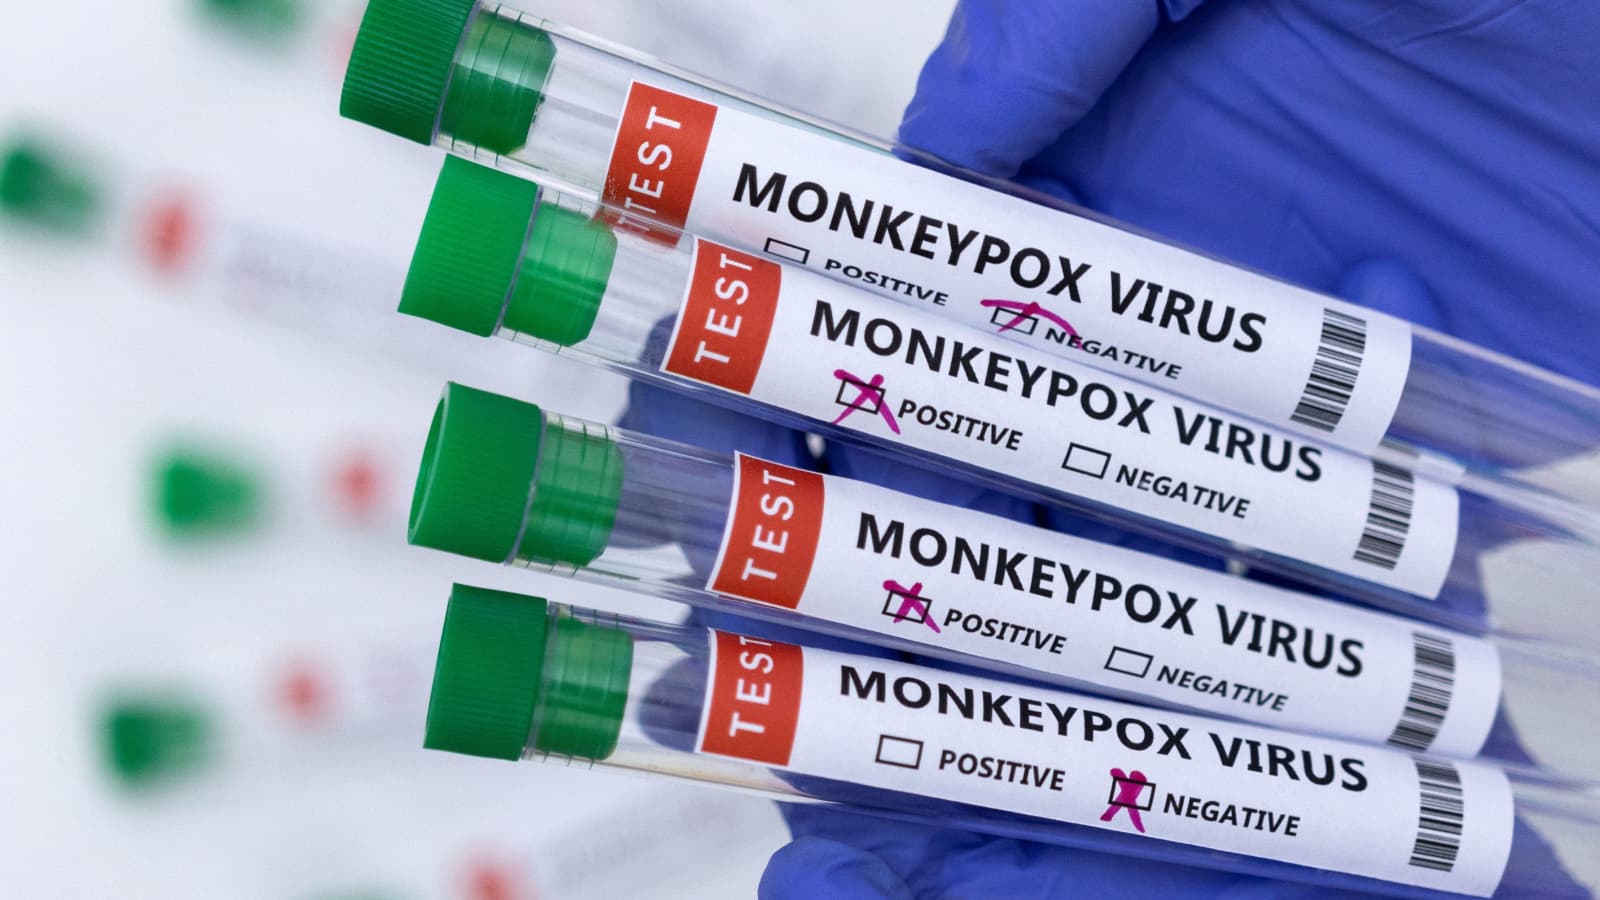 As of present, 16,000 monkeypox cases have been identified so far. Image credit: CNBC